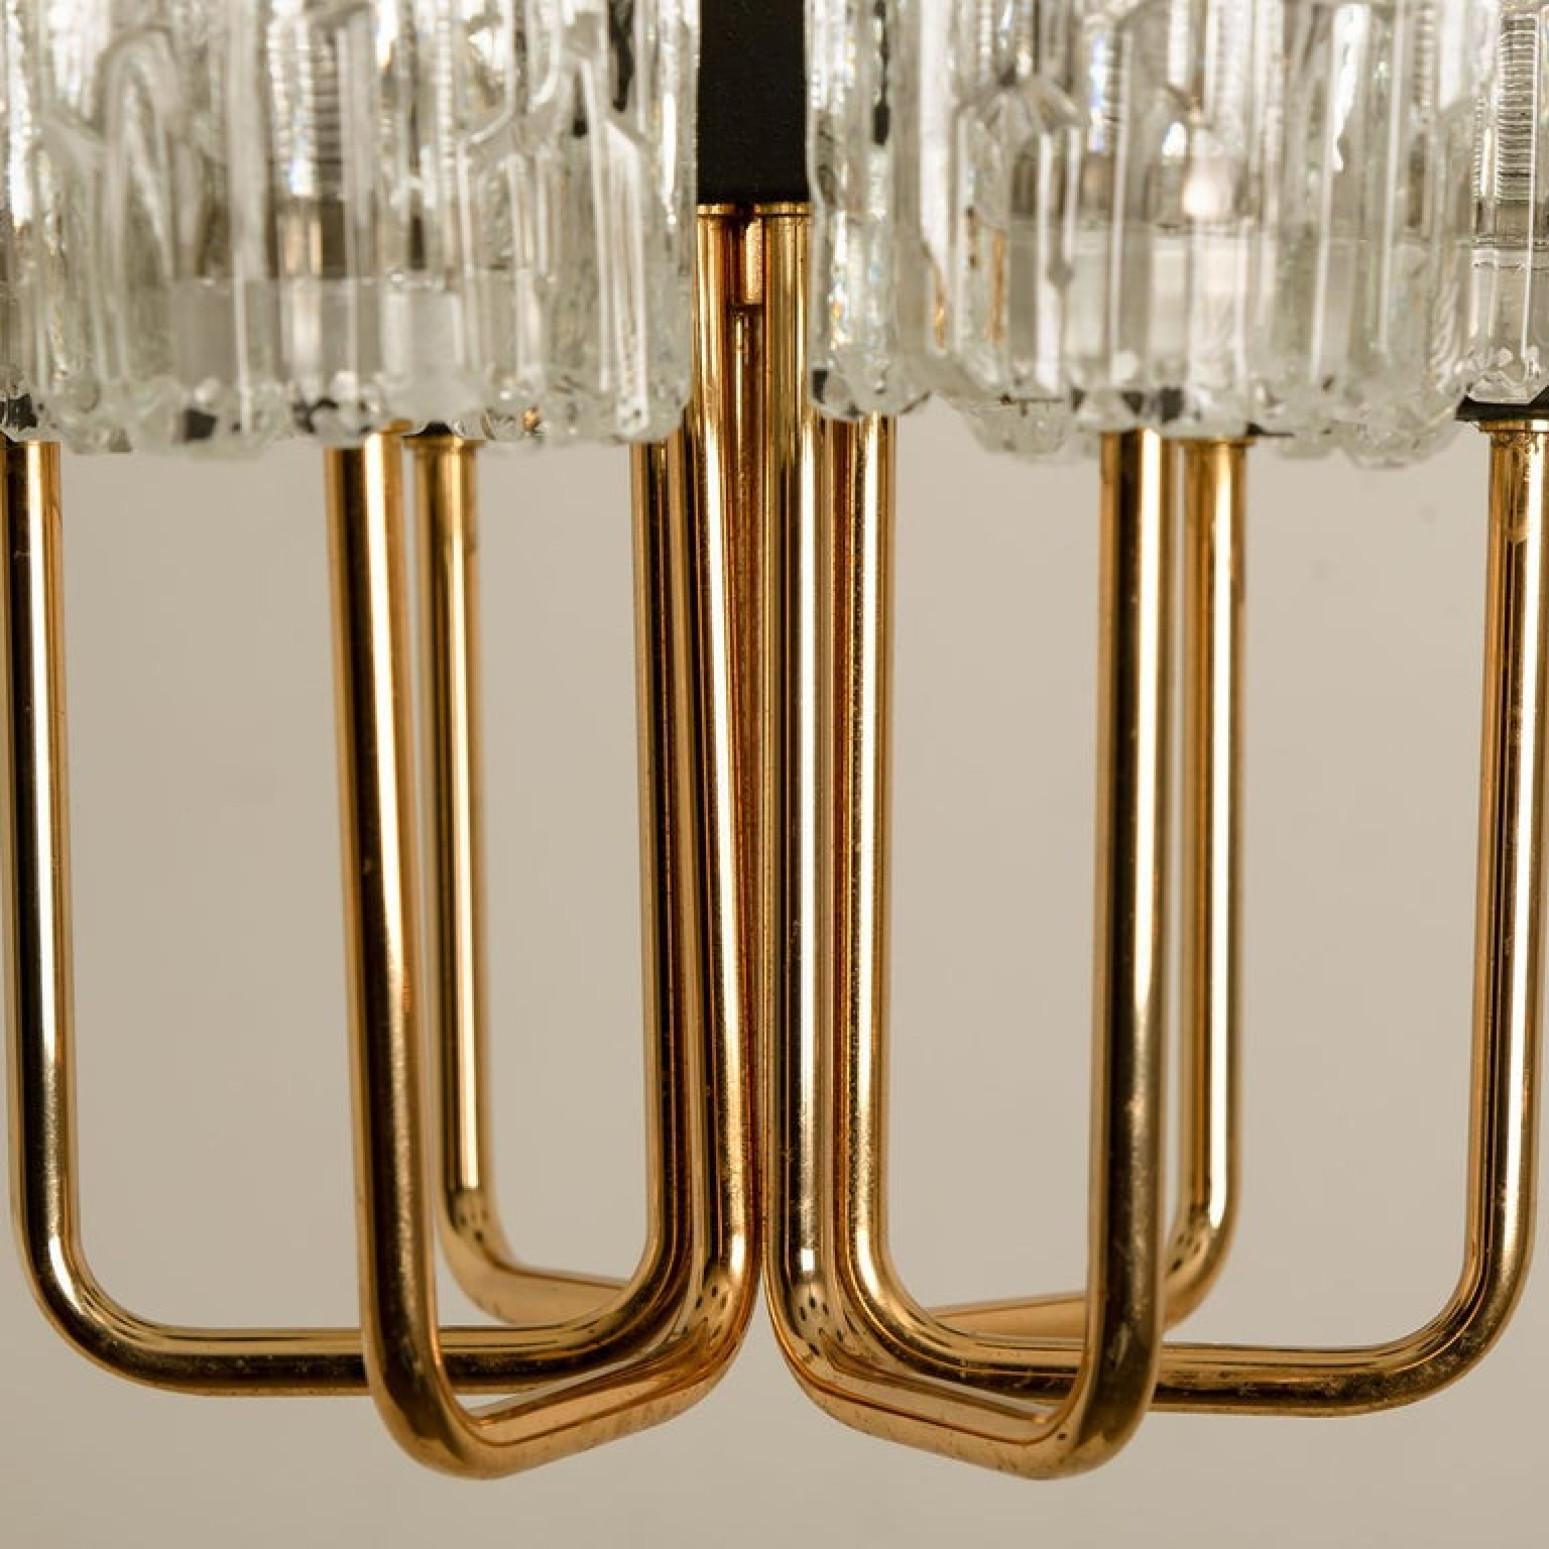 Midcentury Brass and Blown Glass Chandelier by Hillebrand, 1960s For Sale 4